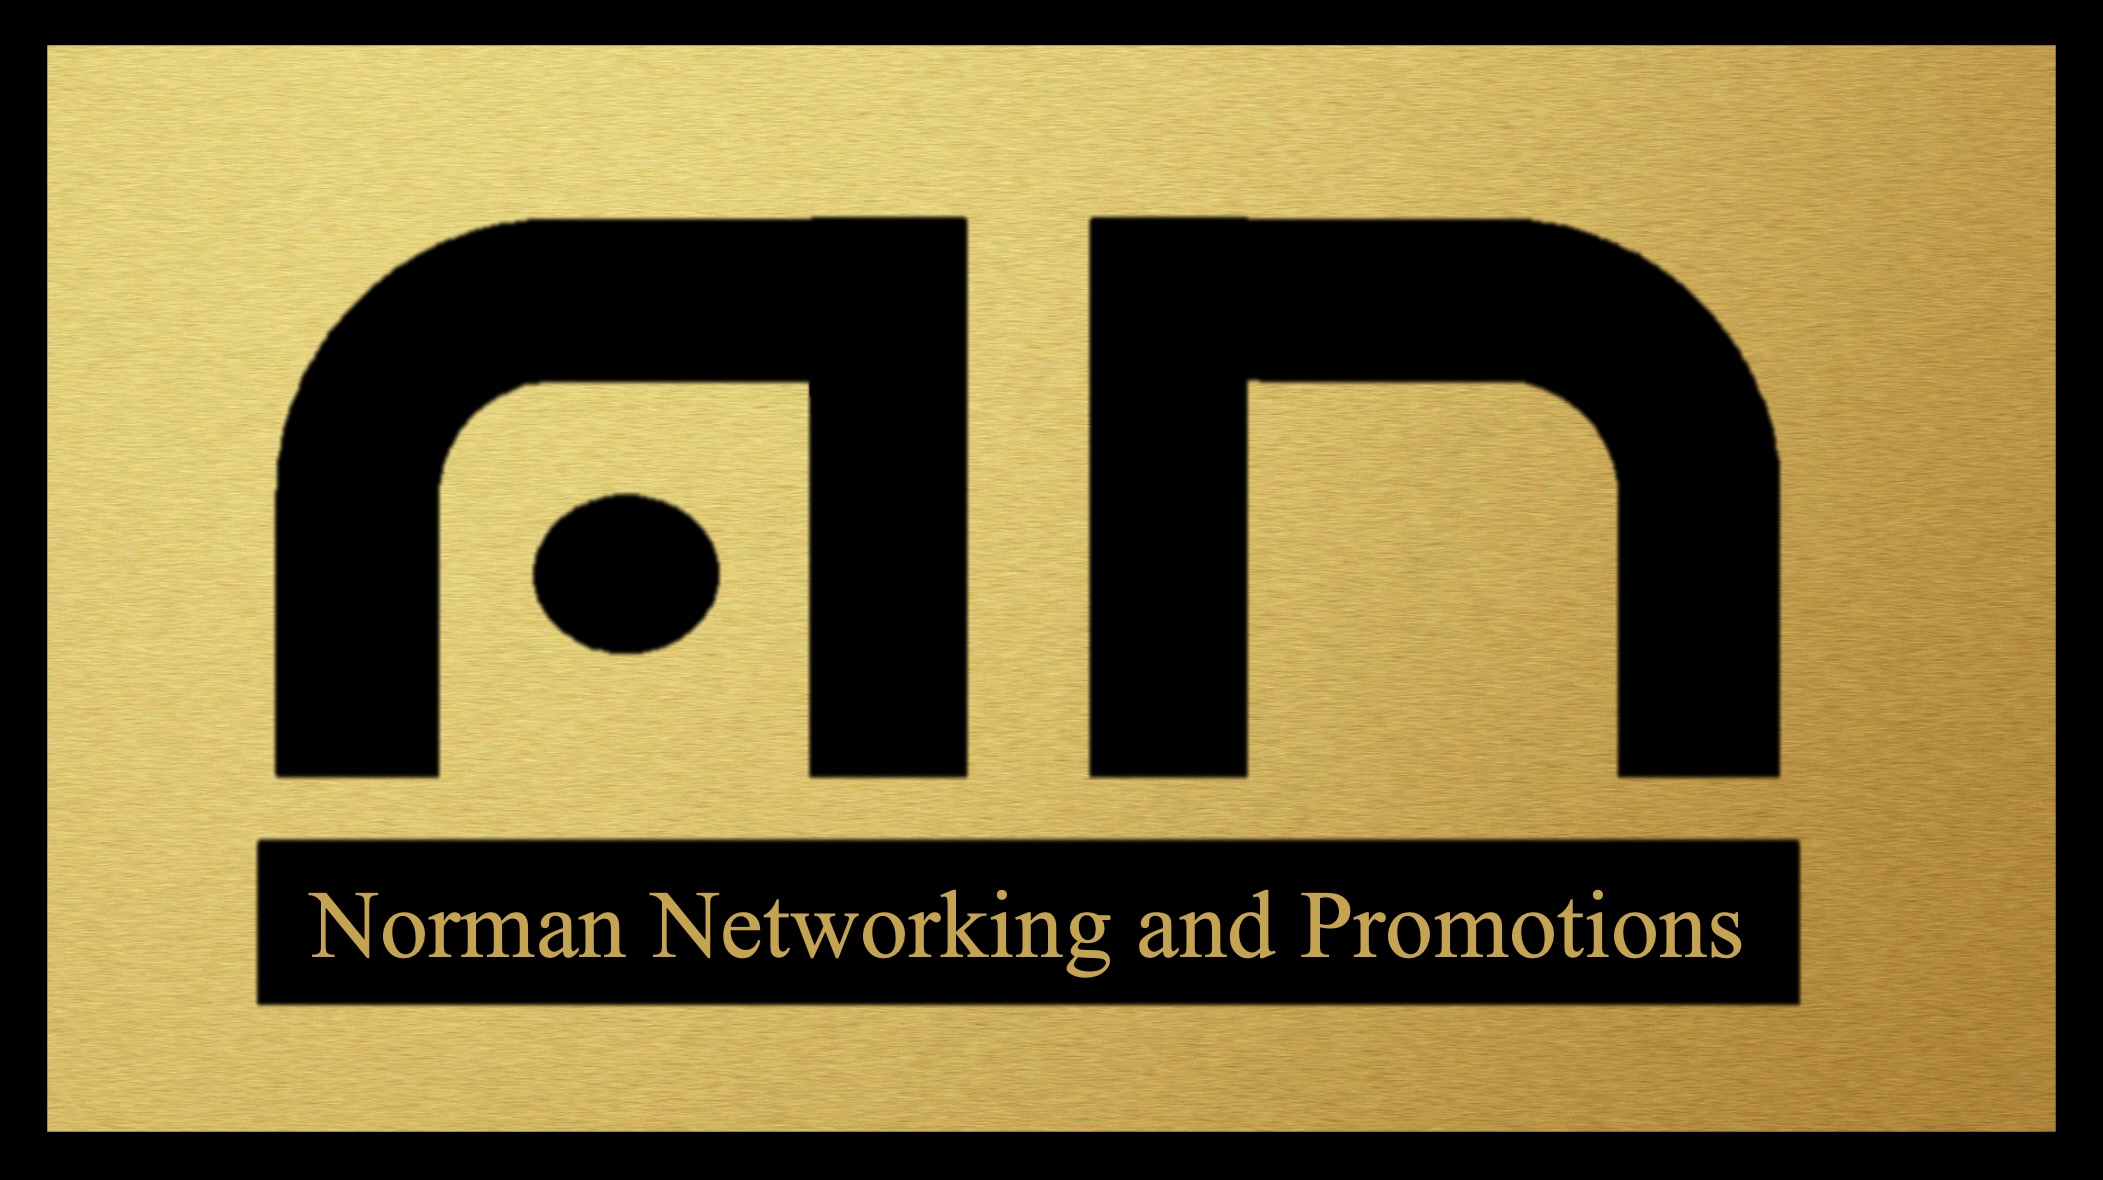 Norman Networking and Promotions